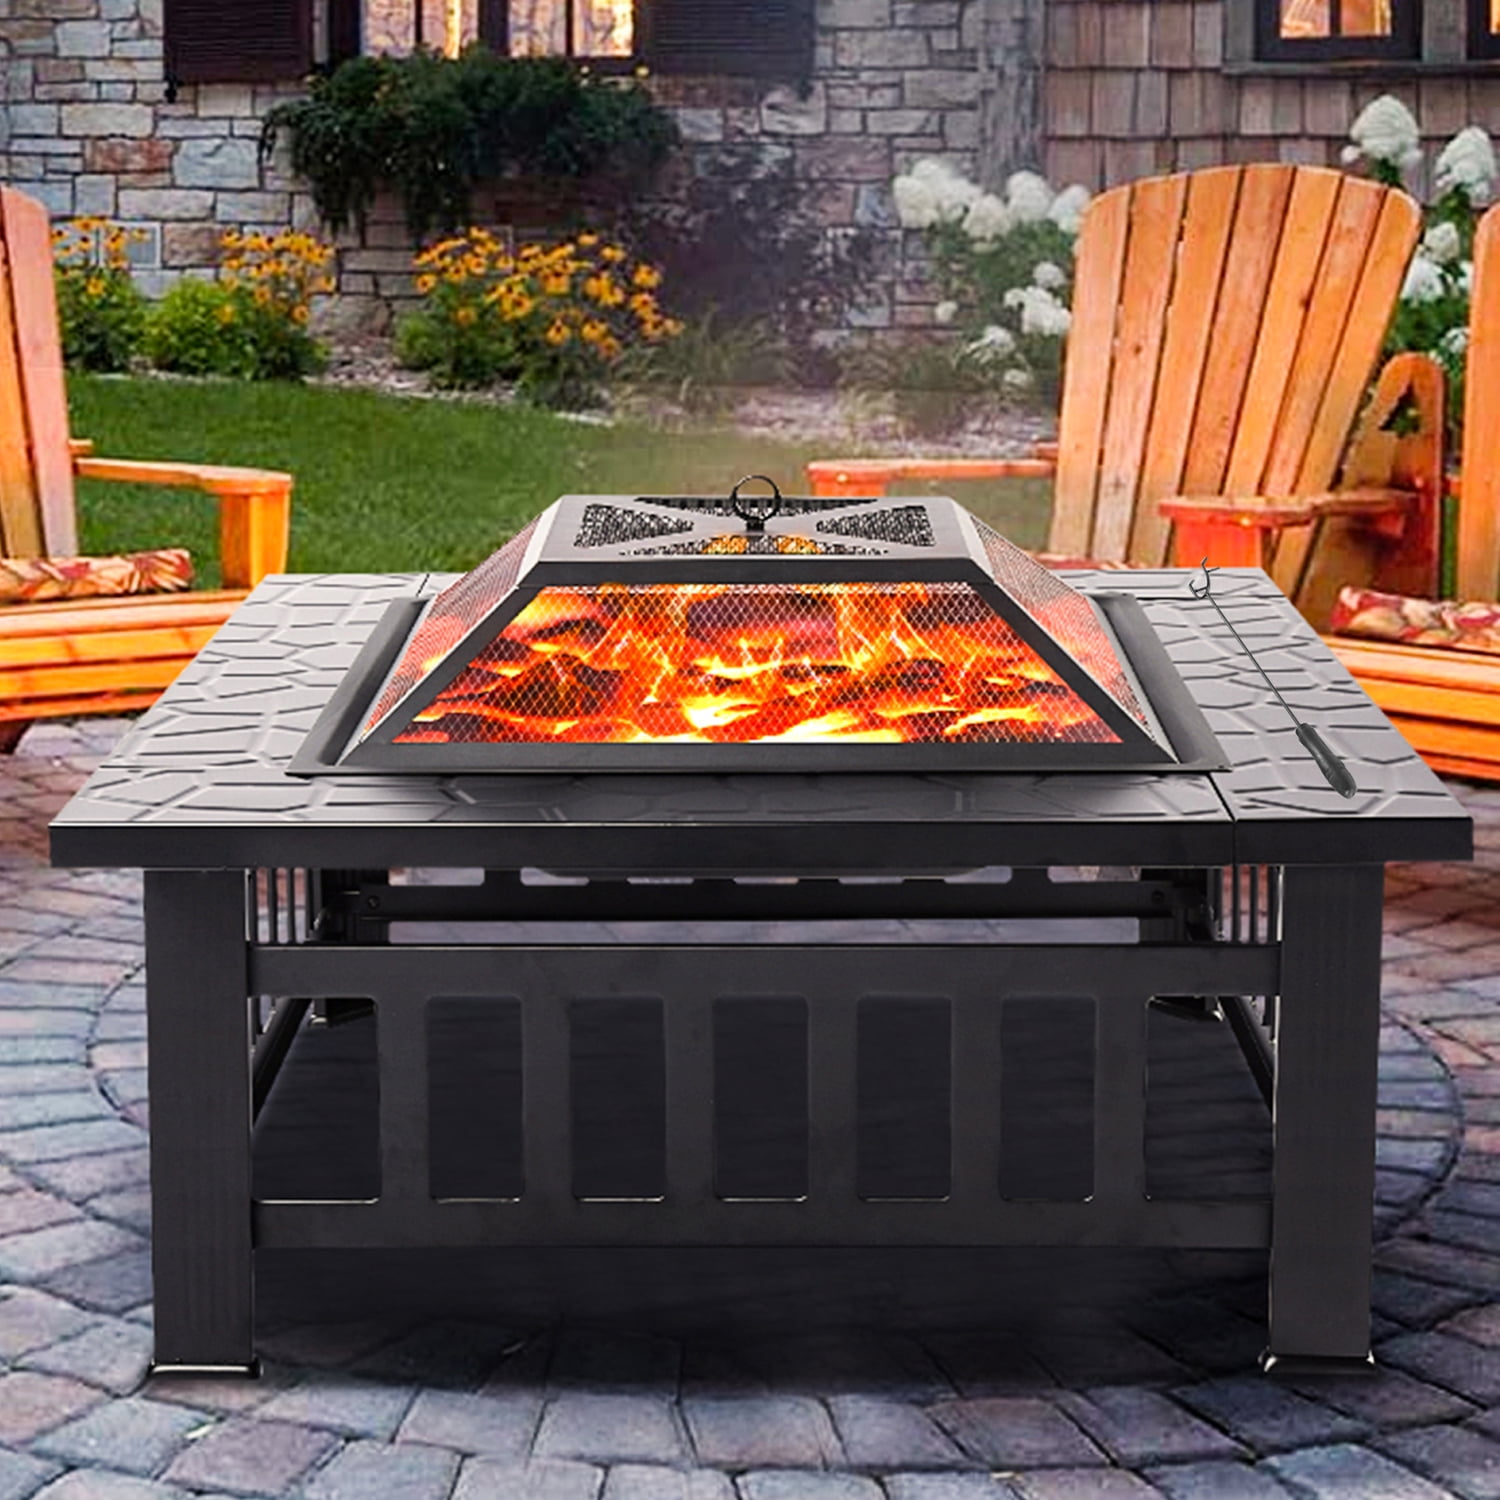 Wood Burning&Charcoal Fire Pit Patio Fireplace Outdoor BBQ Oven 